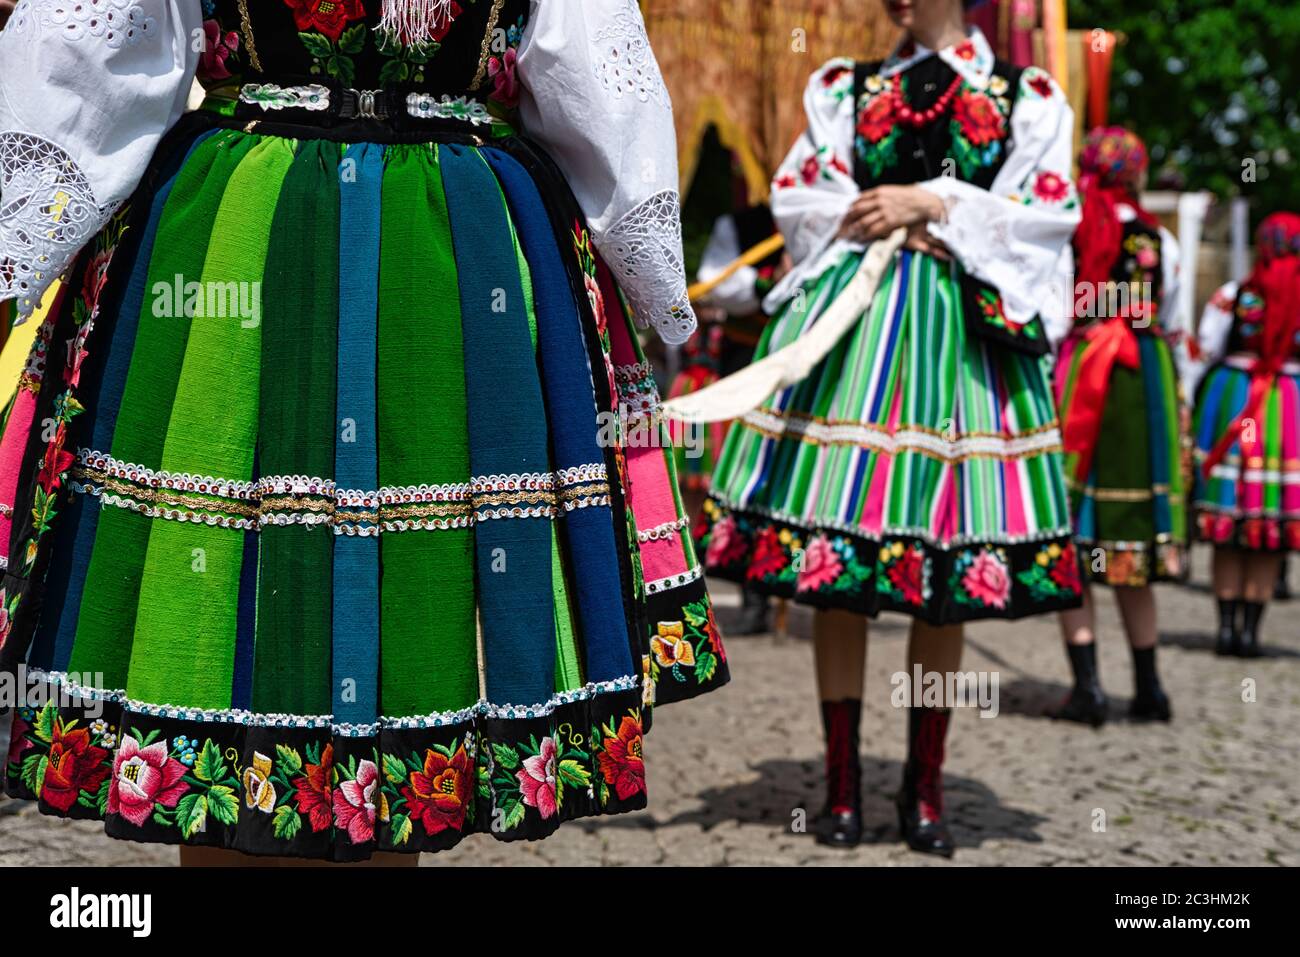 Girls dressed in polish national folk costumes from Lowicz during Corpus Christi procession. Close up of traditional colorful striped folk skirts Stock Photo